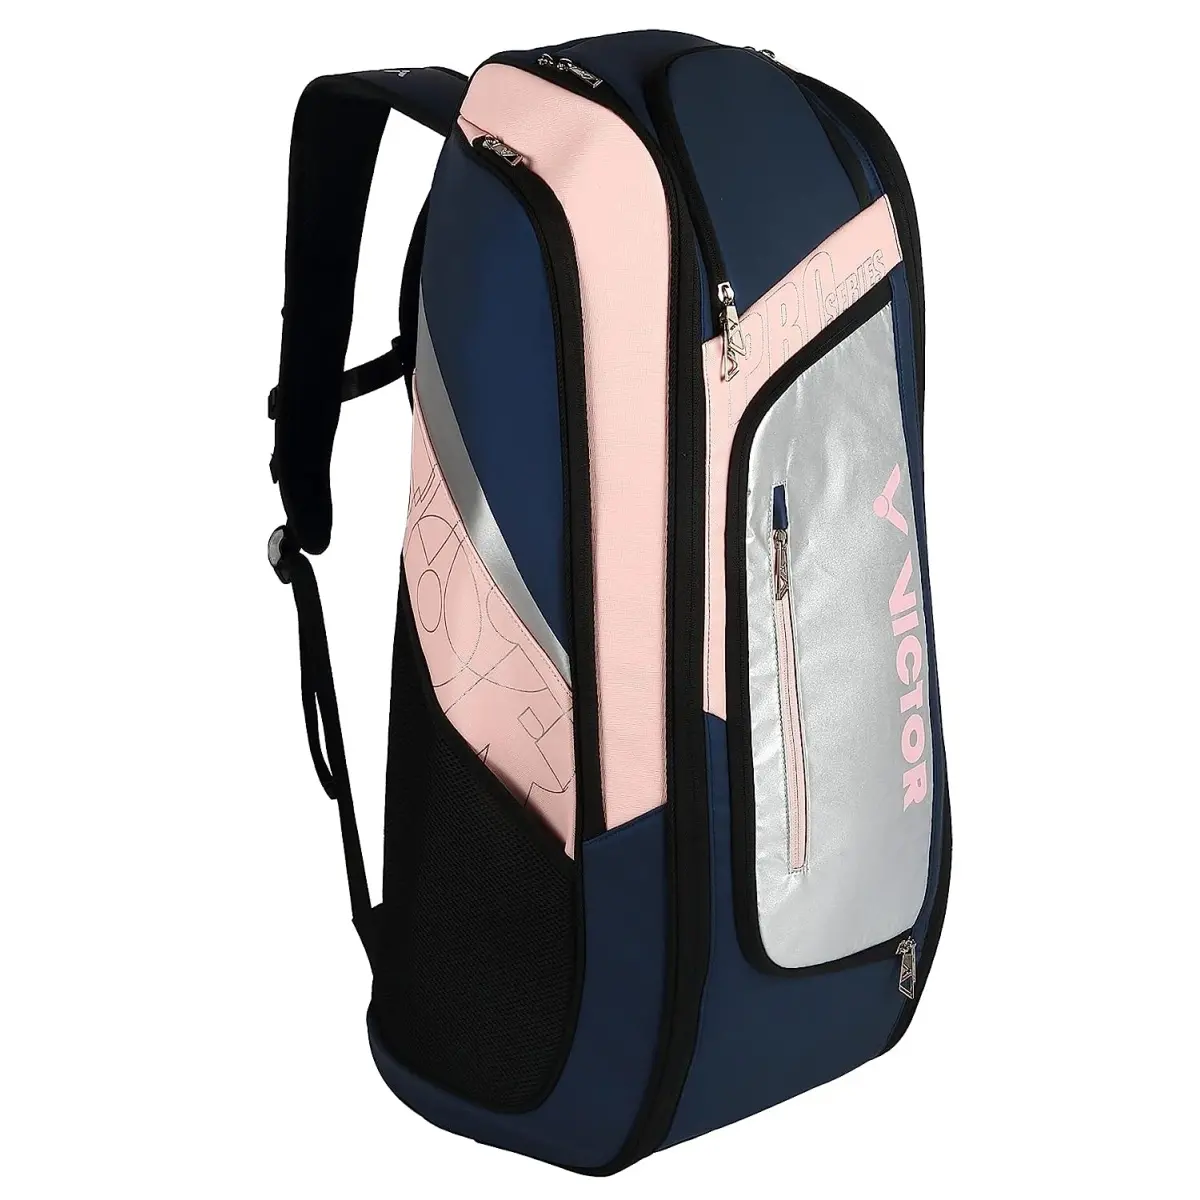 Victor Badminton Bags | Low prices & Fast delivery!